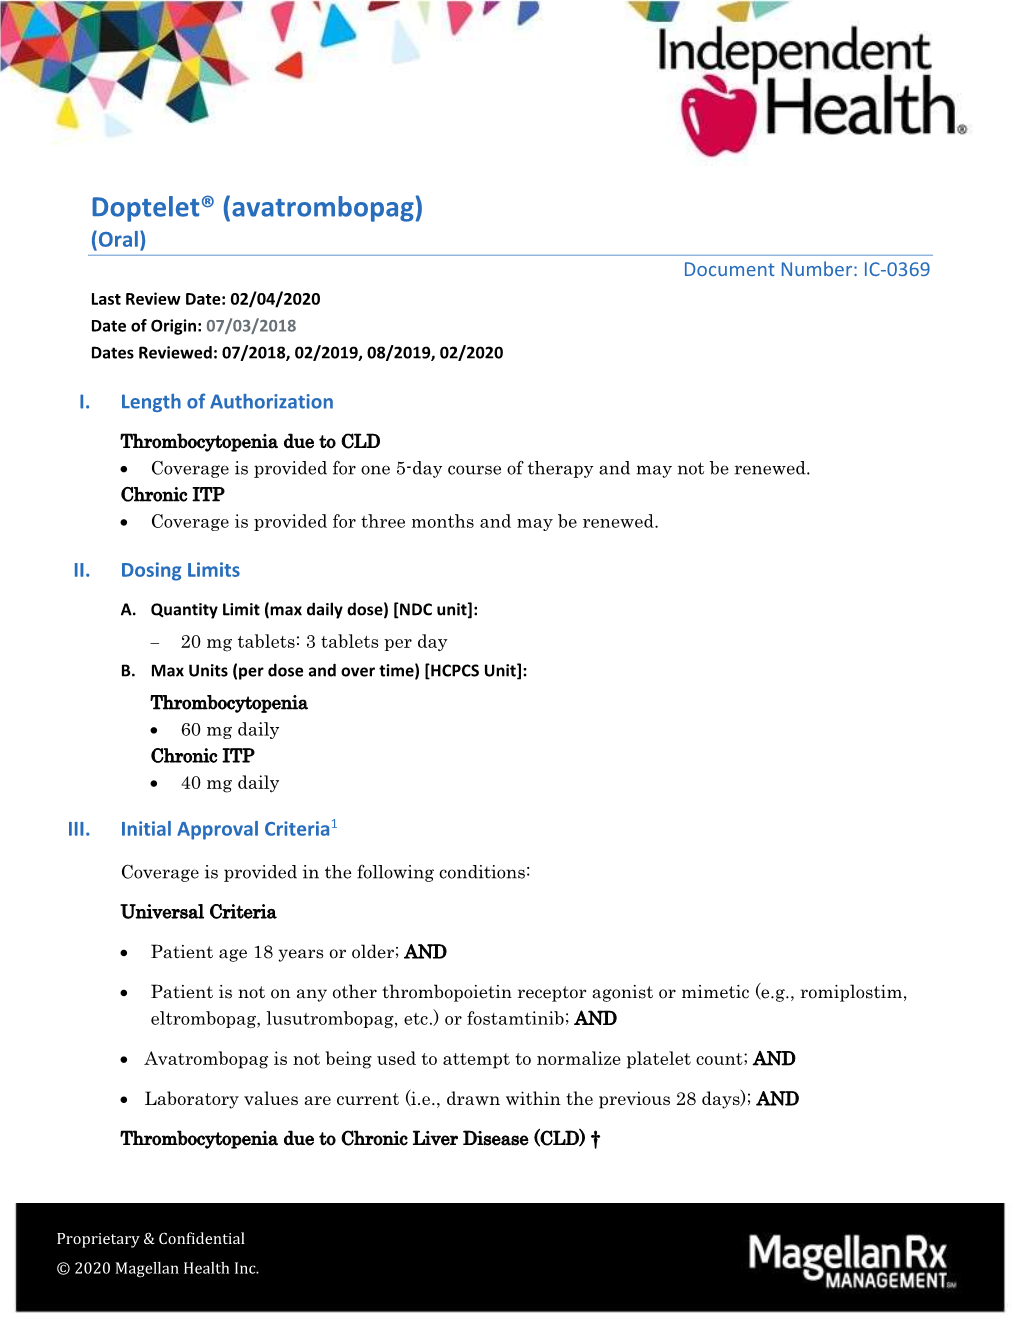 Doptelet® (Avatrombopag) (Oral) Document Number: IC-0369 Last Review Date: 02/04/2020 Date of Origin: 07/03/2018 Dates Reviewed: 07/2018, 02/2019, 08/2019, 02/2020